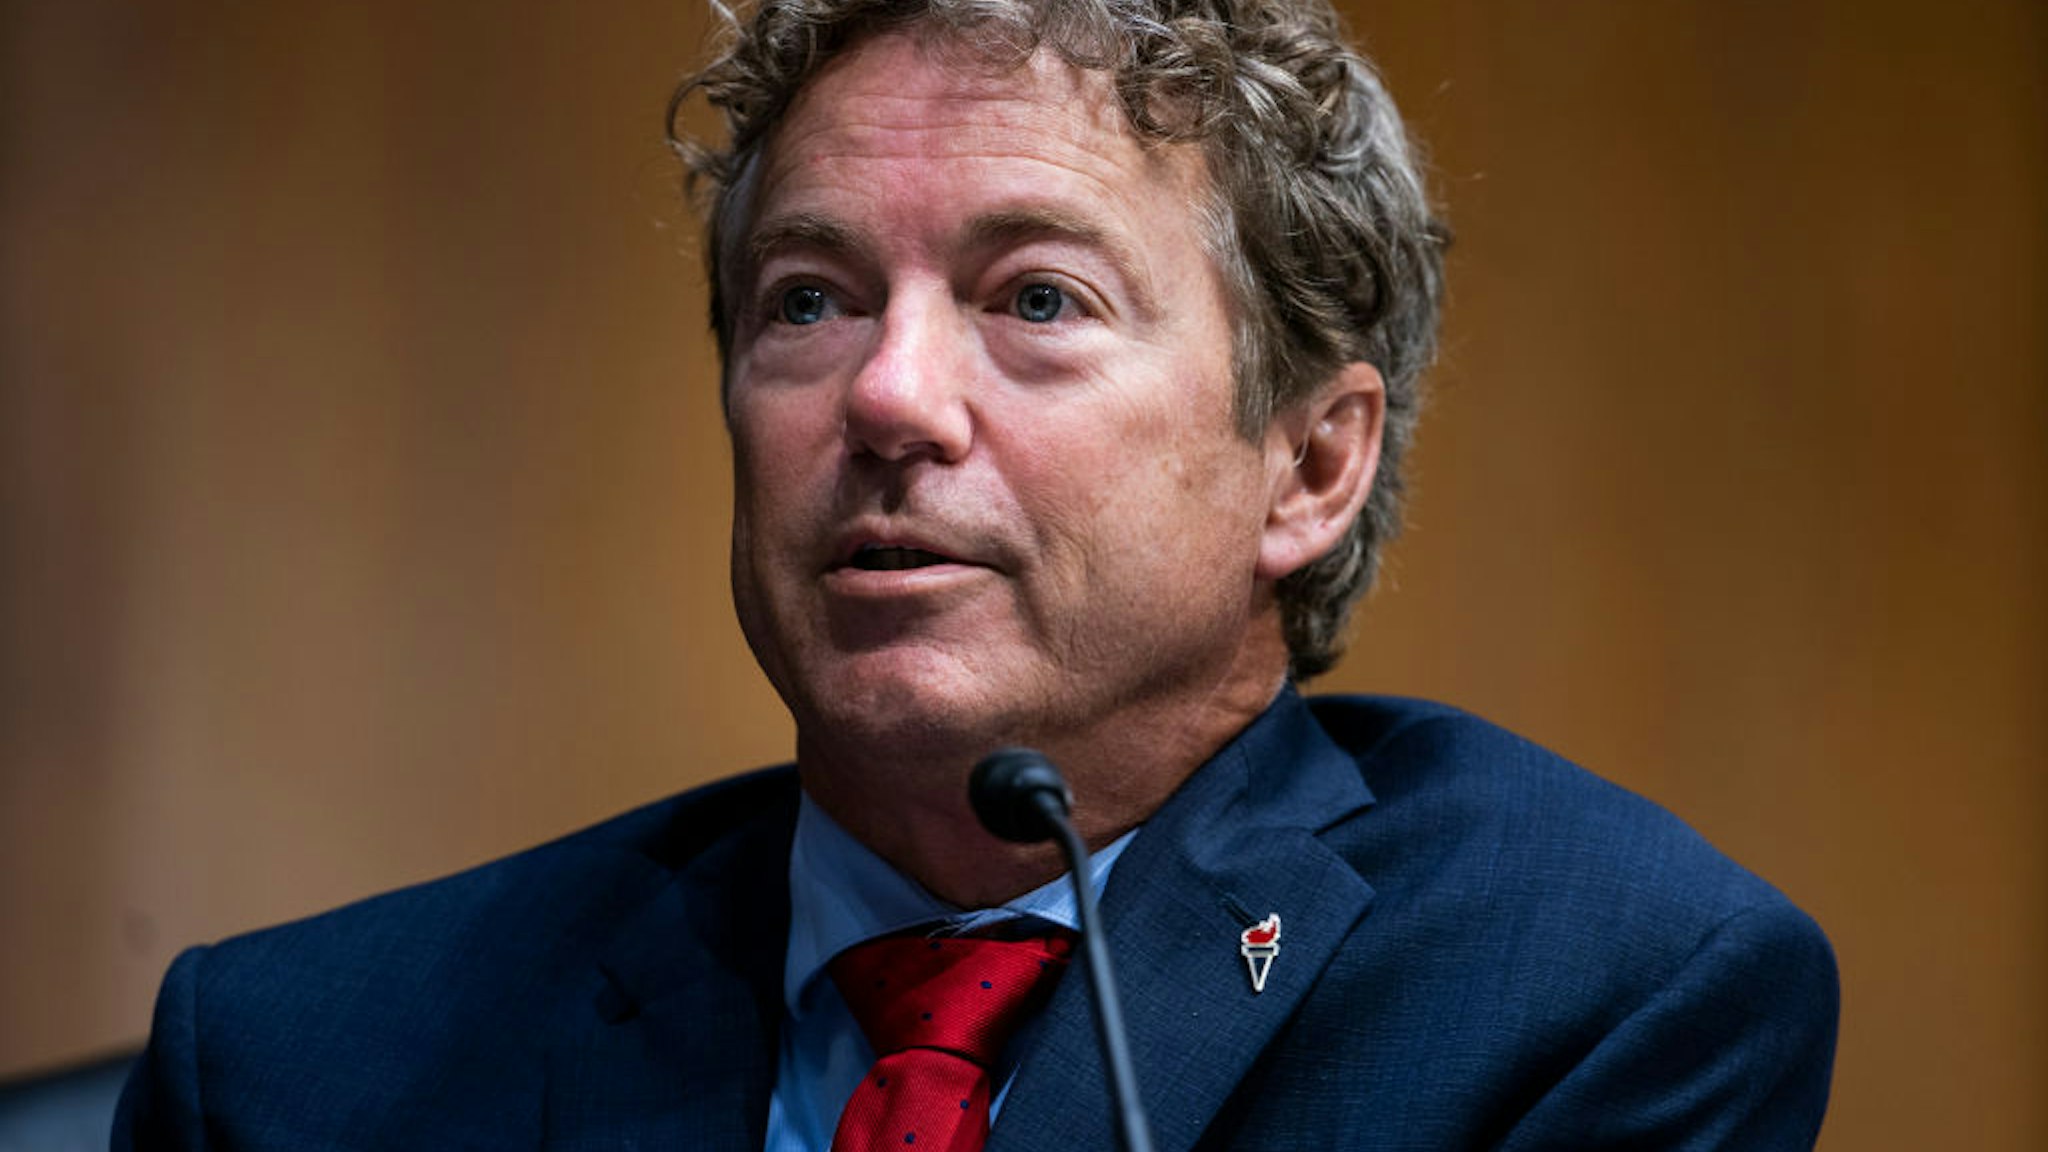 Sen. Rand Paul (R-KY) questions U.S. Secretary of State Mike Pompeo during a Senate Foreign Relations committee hearing on the State Department's 2021 budget in the Dirksen Senate Office Building on July 30, 2020 in Washington, DC.